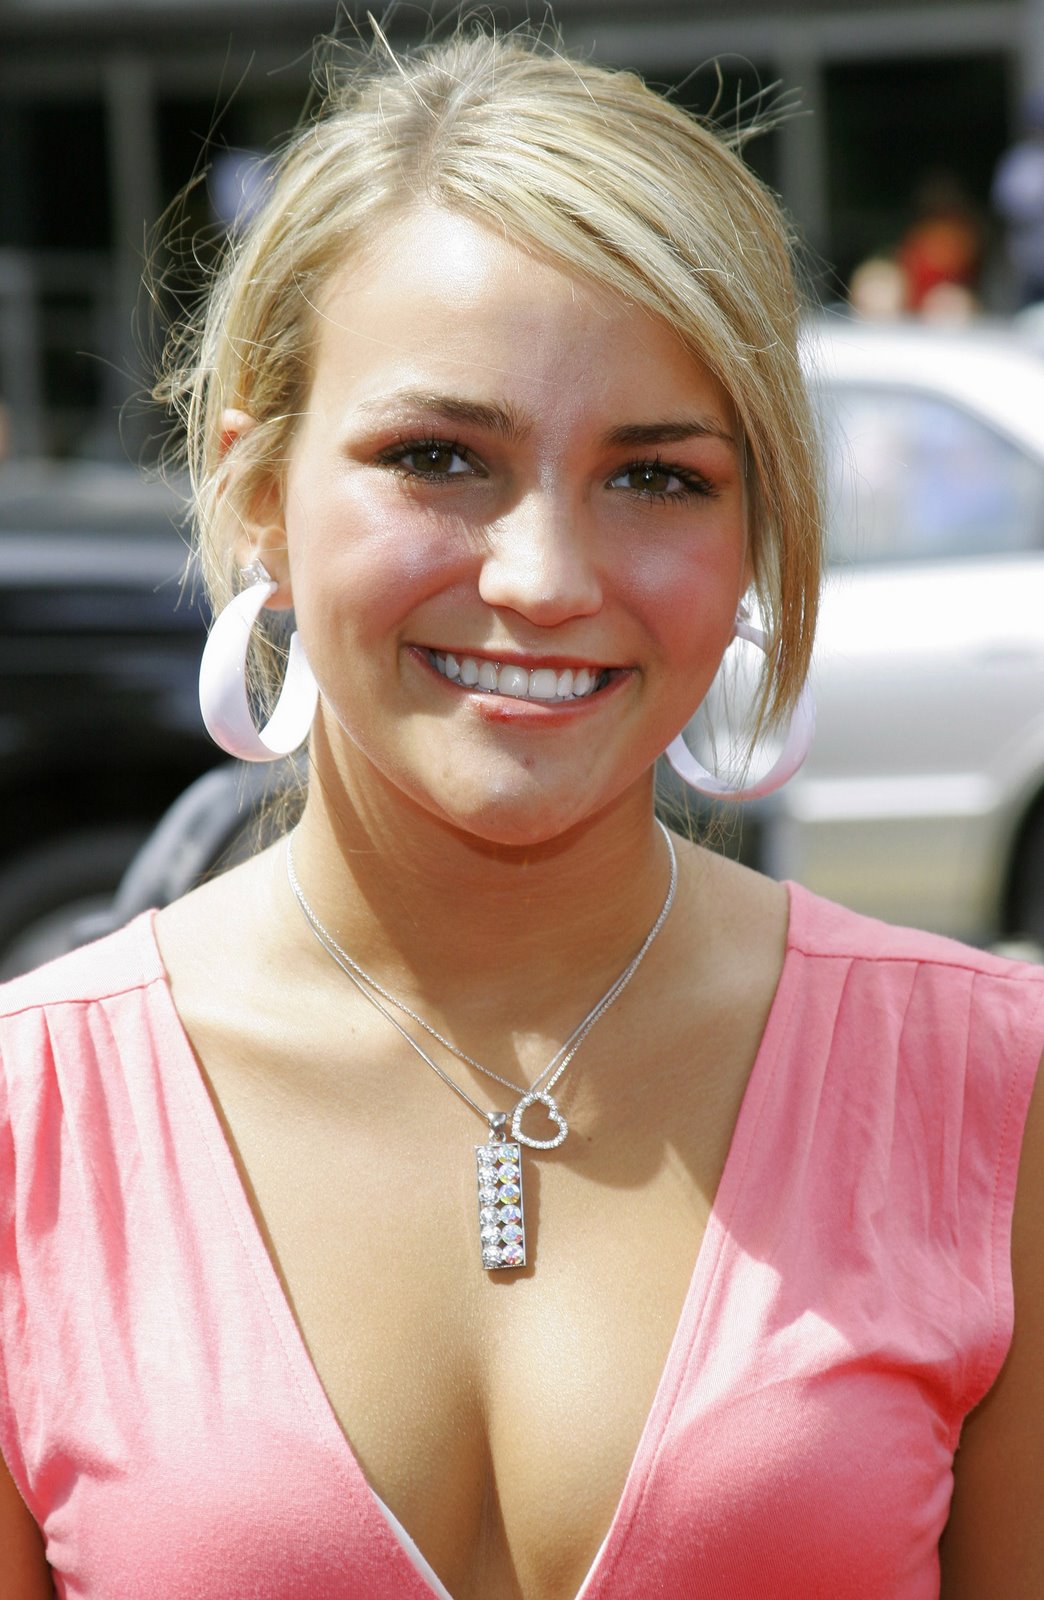 Jamie Lynn Spears Sexy Pictures Hot Photos.